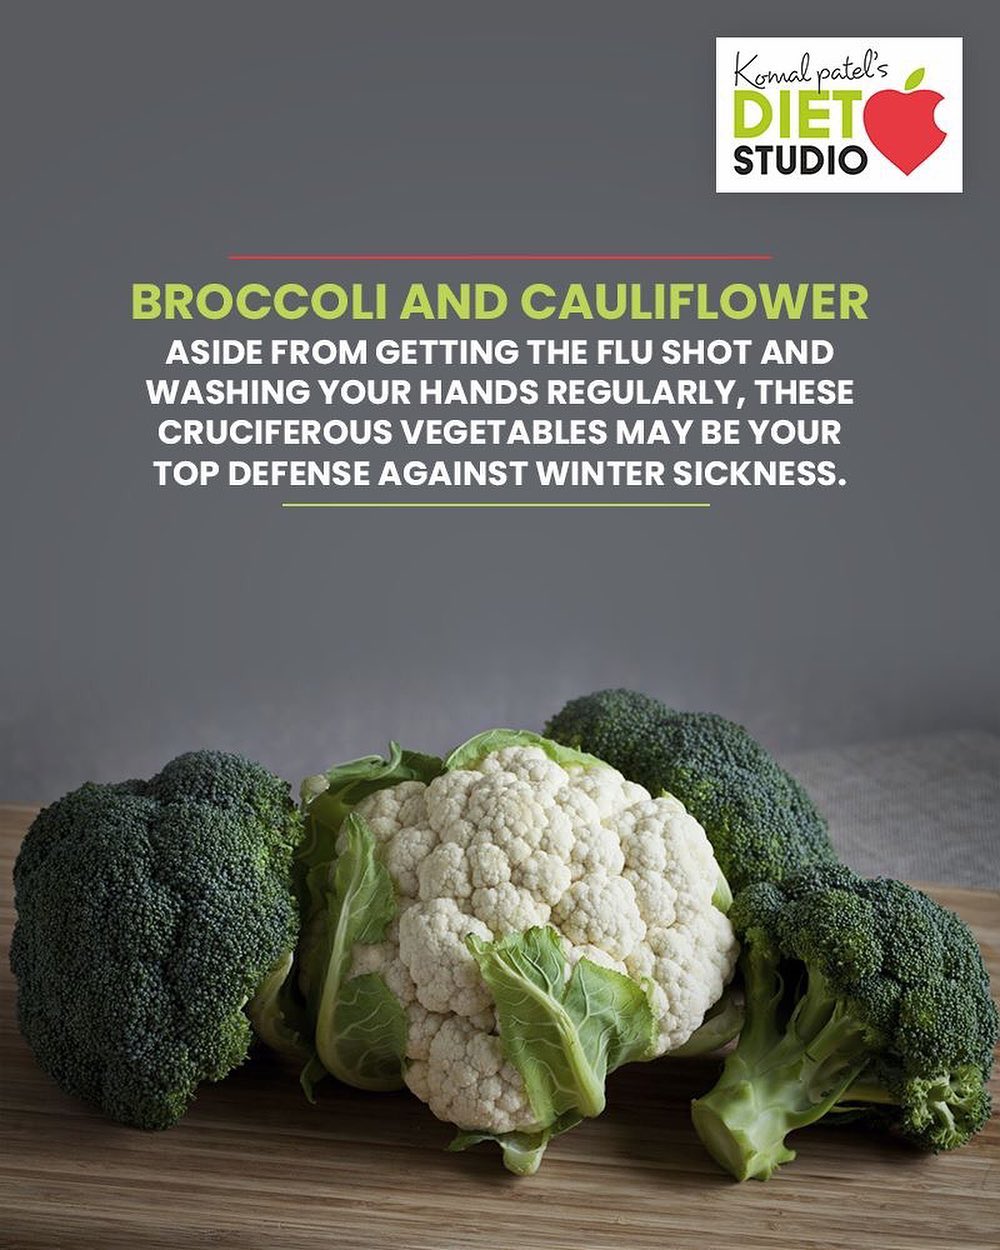 Aside from getting the flu shot and washing your hands regularly, these cruciferous vegetables may be your top defense against winter sickness. Broccoli and cauliflower are both high in vitamin C, which is associated with enhanced immune function. If you can’t find fresh versions, don’t fret — frozen broccoli and cauliflower are just as nutritious.

#komalpatel #diet #goodfood #eathealthy #goodhealth